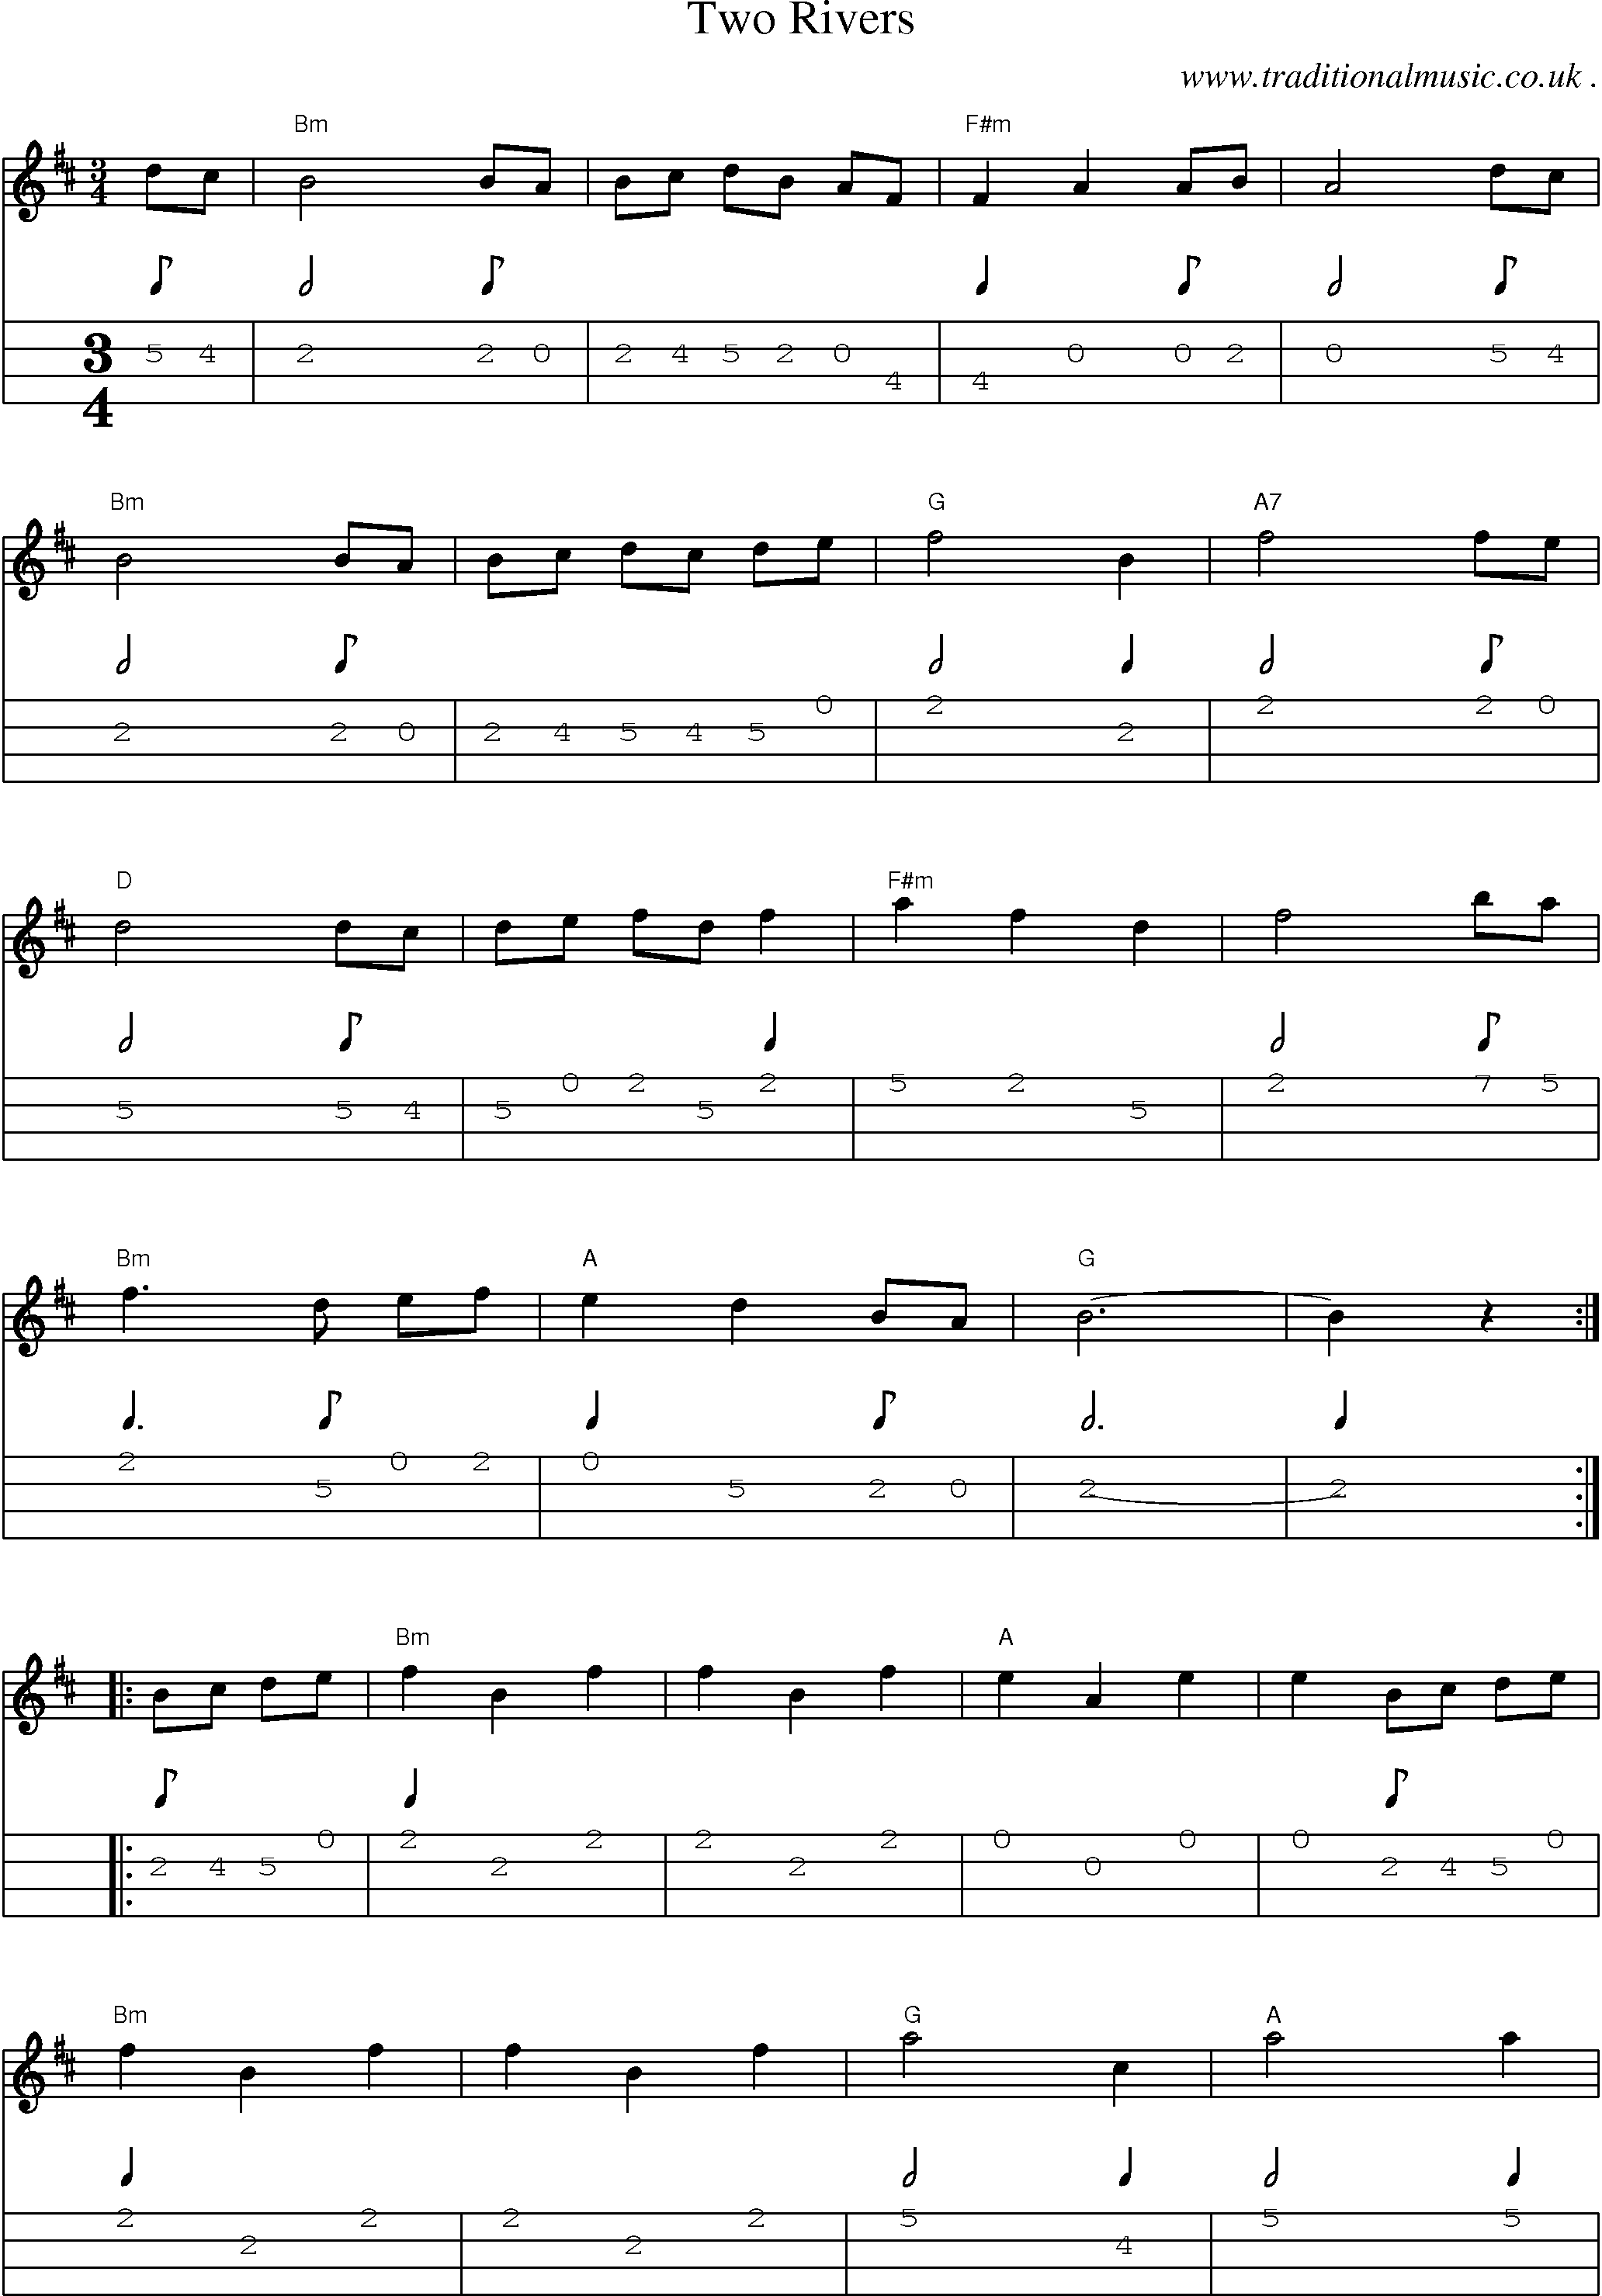 Music Score and Guitar Tabs for Two Rivers